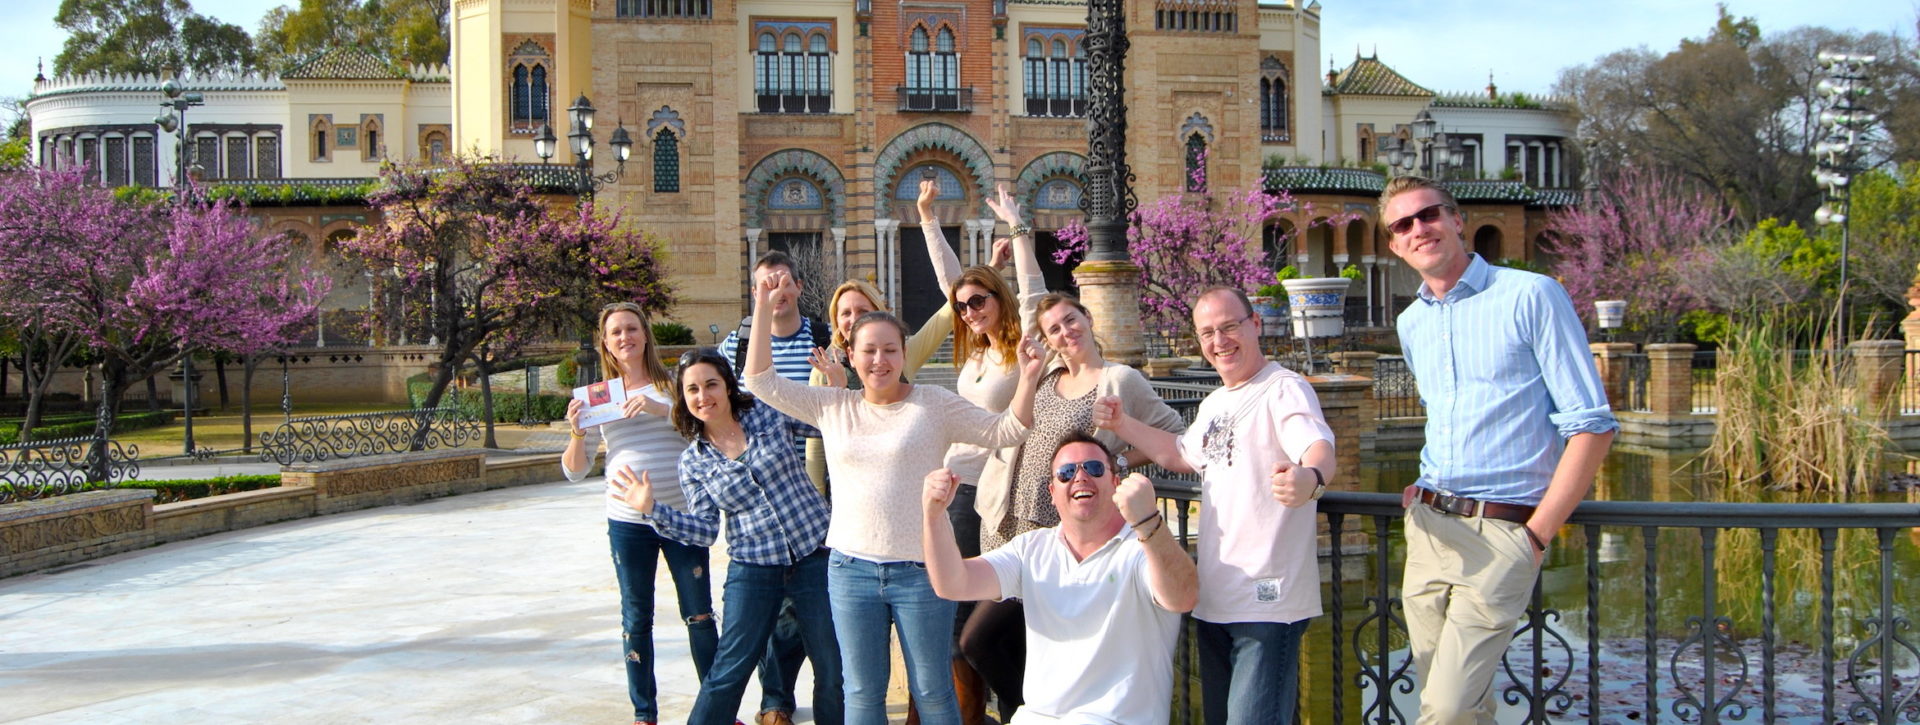 Team Building Events in Seville